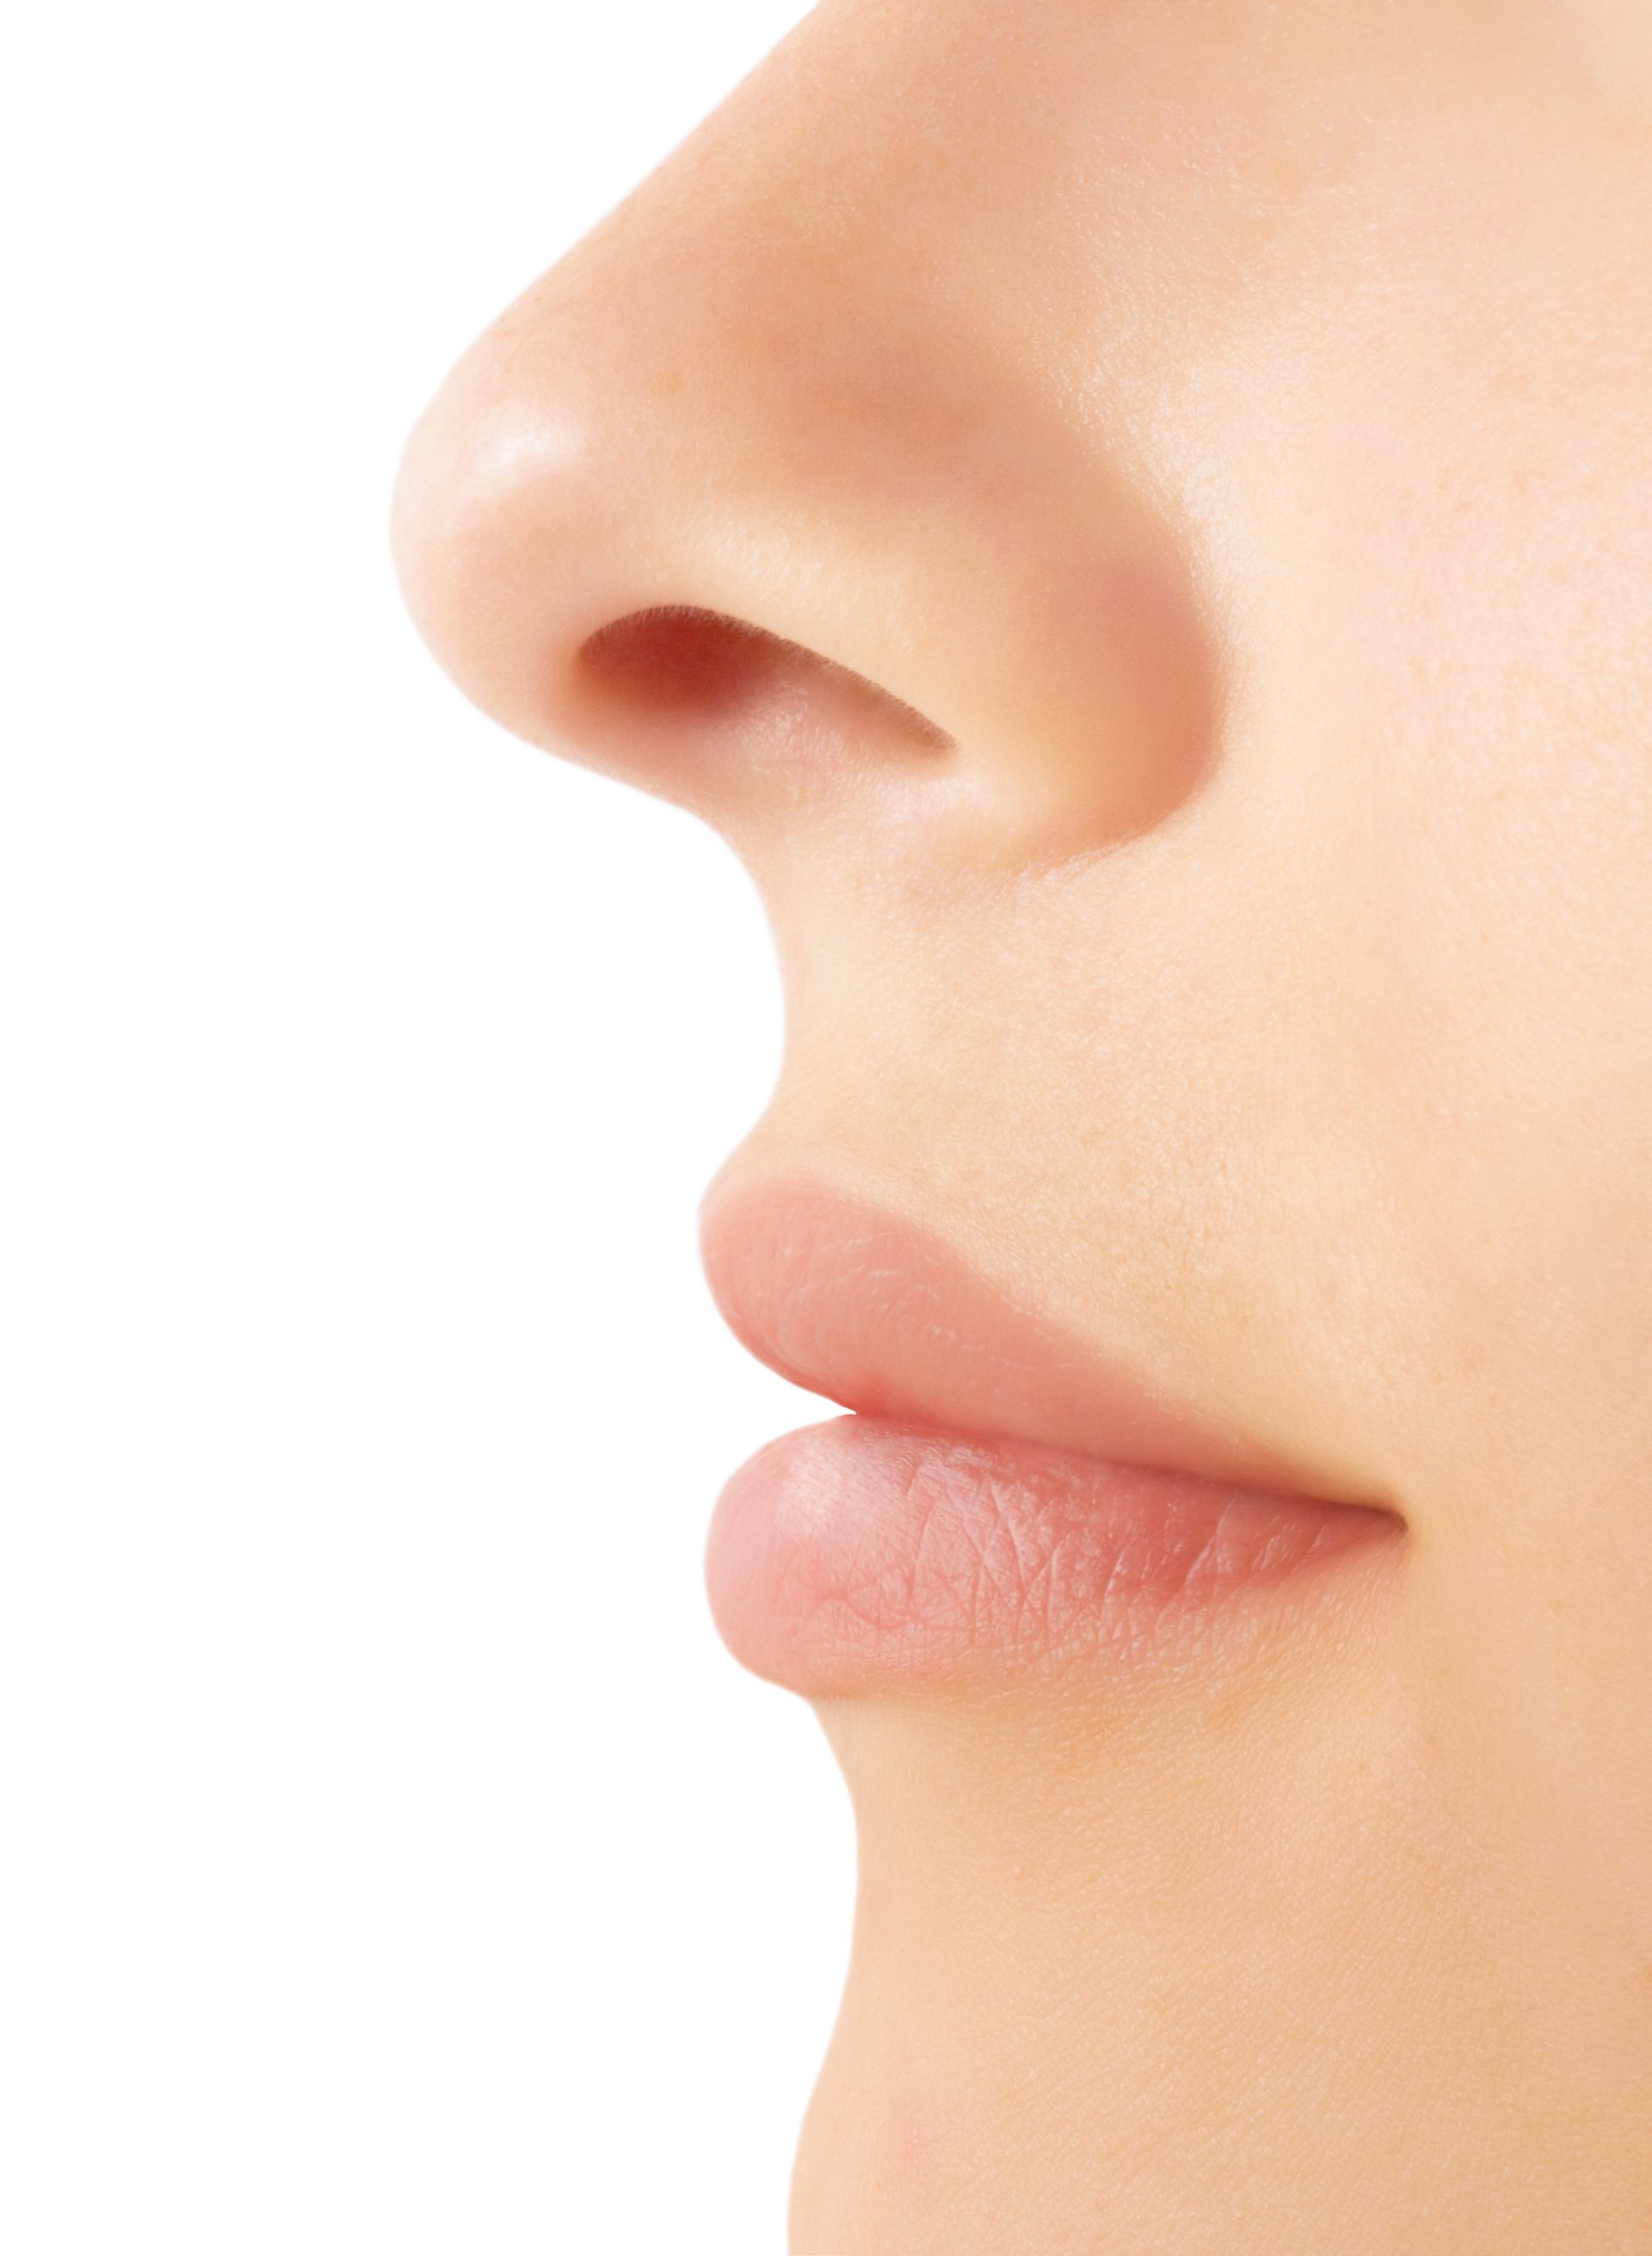 a close up of a woman 's nose and lips on a white background .